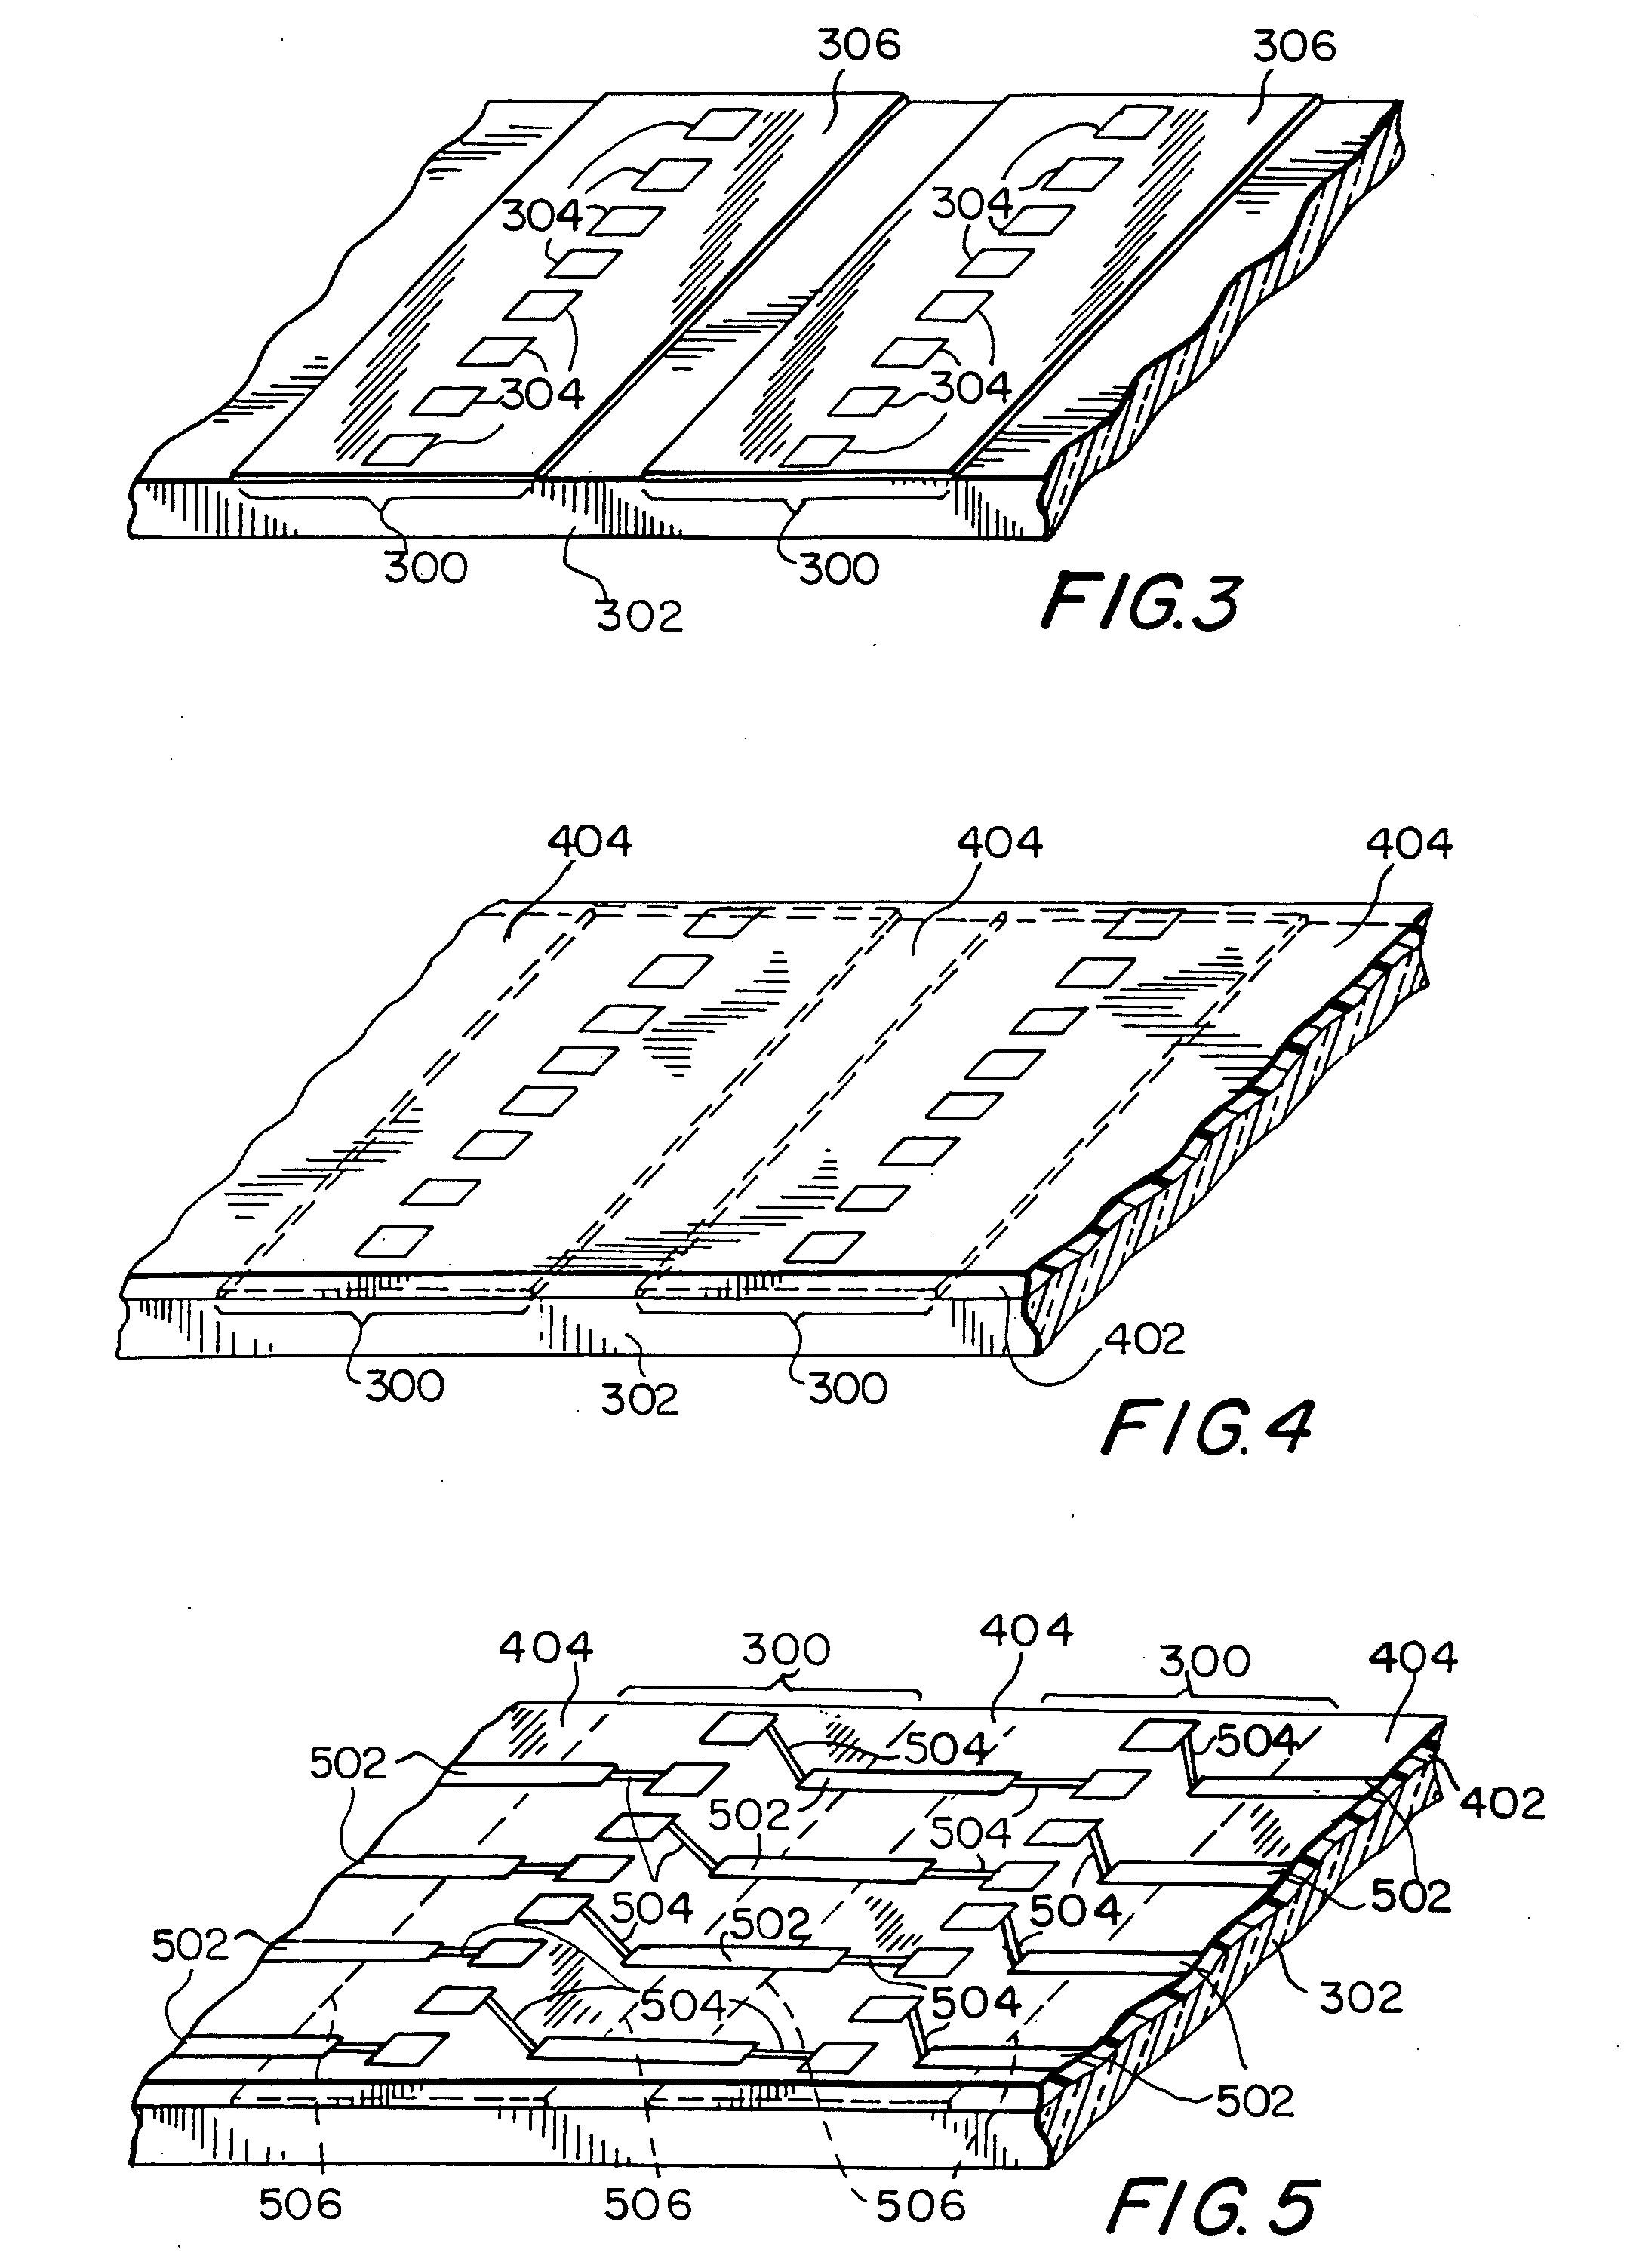 Castellation wafer level packaging of integrated circuit chips